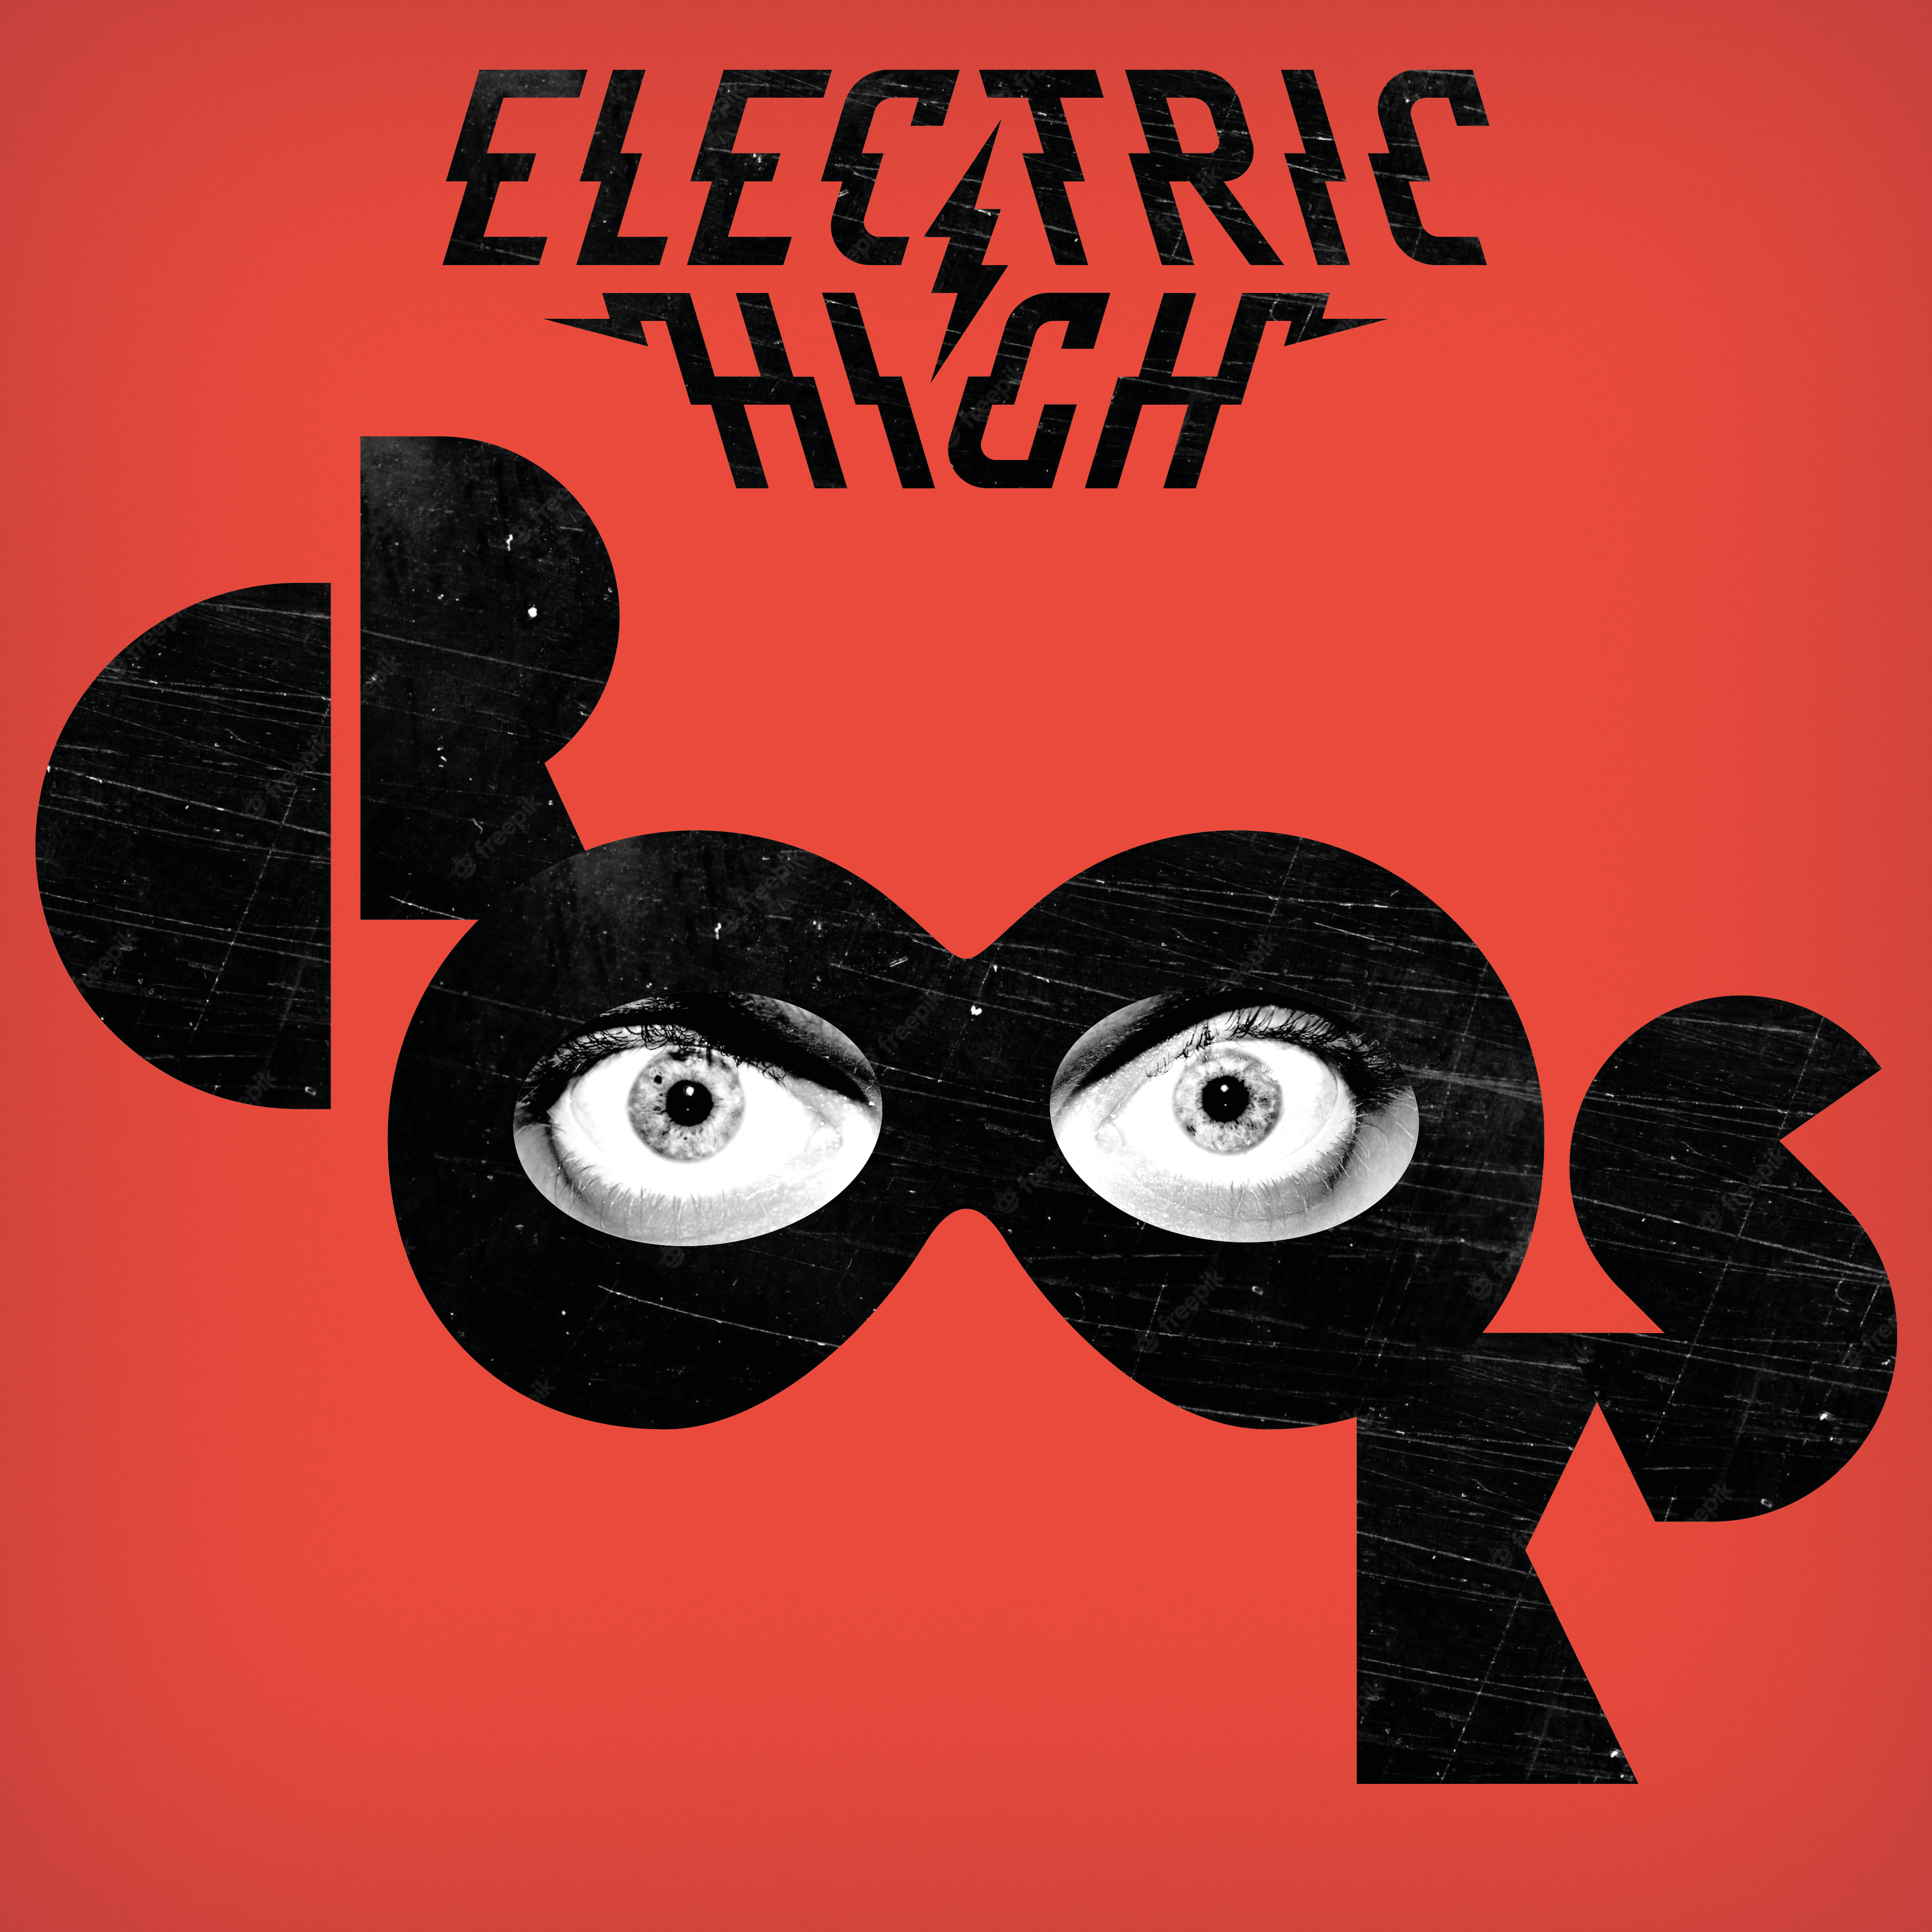 Electric High Unleashes Electrifying New Single “Crooks” – A Tale of Rock ‘n’ Roll Intrigue and Energy